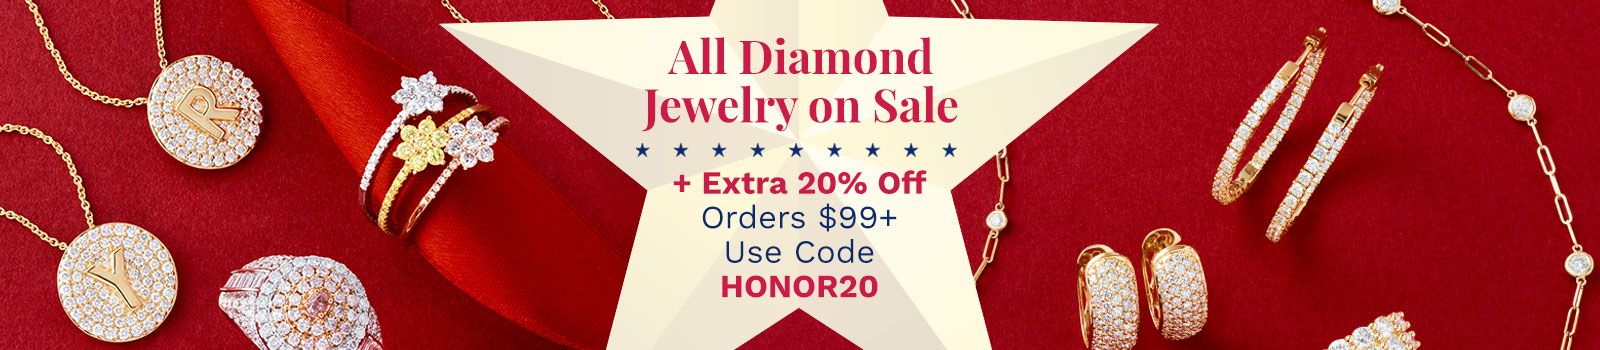 All Diamond Jewelry on Sale  + Extra 20% Off Orders $99+ Use Code: HONOR20 | 208-686 206-719 208-688 208-076 208-074